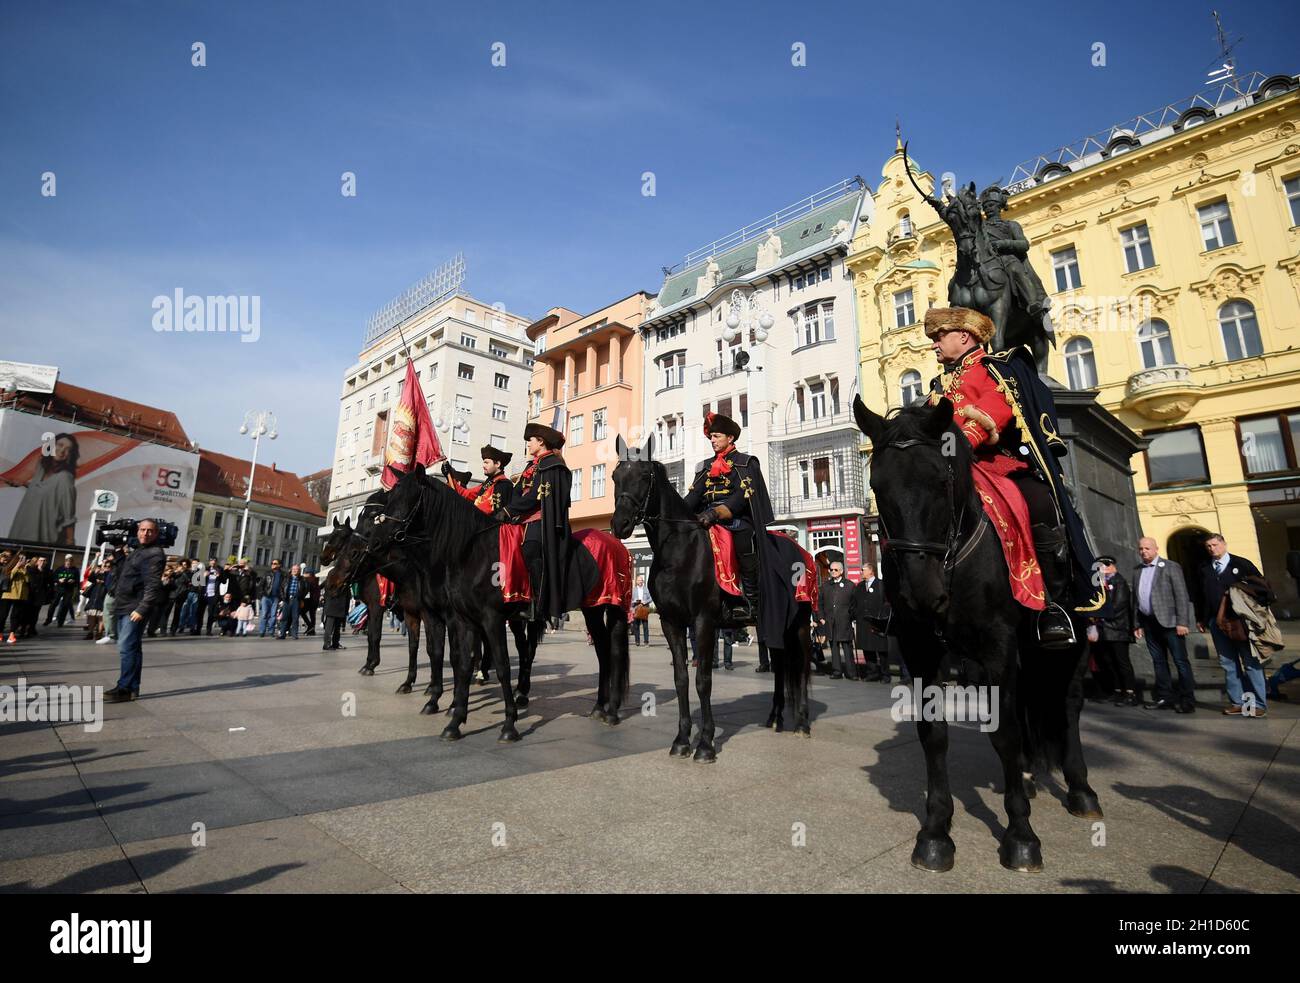 (211018) -- ZAGREB, Oct. 18, 2021 (Xinhua) -- Soldiers in traditional military uniforms perform in the Cravat Day celebration in Zagreb, Croatia, on Oct. 18, 2021. Croatians celebrate World Cravat Day on Oct. 18 every year. The Cravat, symbol of culture and style, originated from the red neck scarves worn by Croatian soldiers serving in France in the 17th century. (Marko Lukunic/Pixsell via Xinhua) Stock Photo